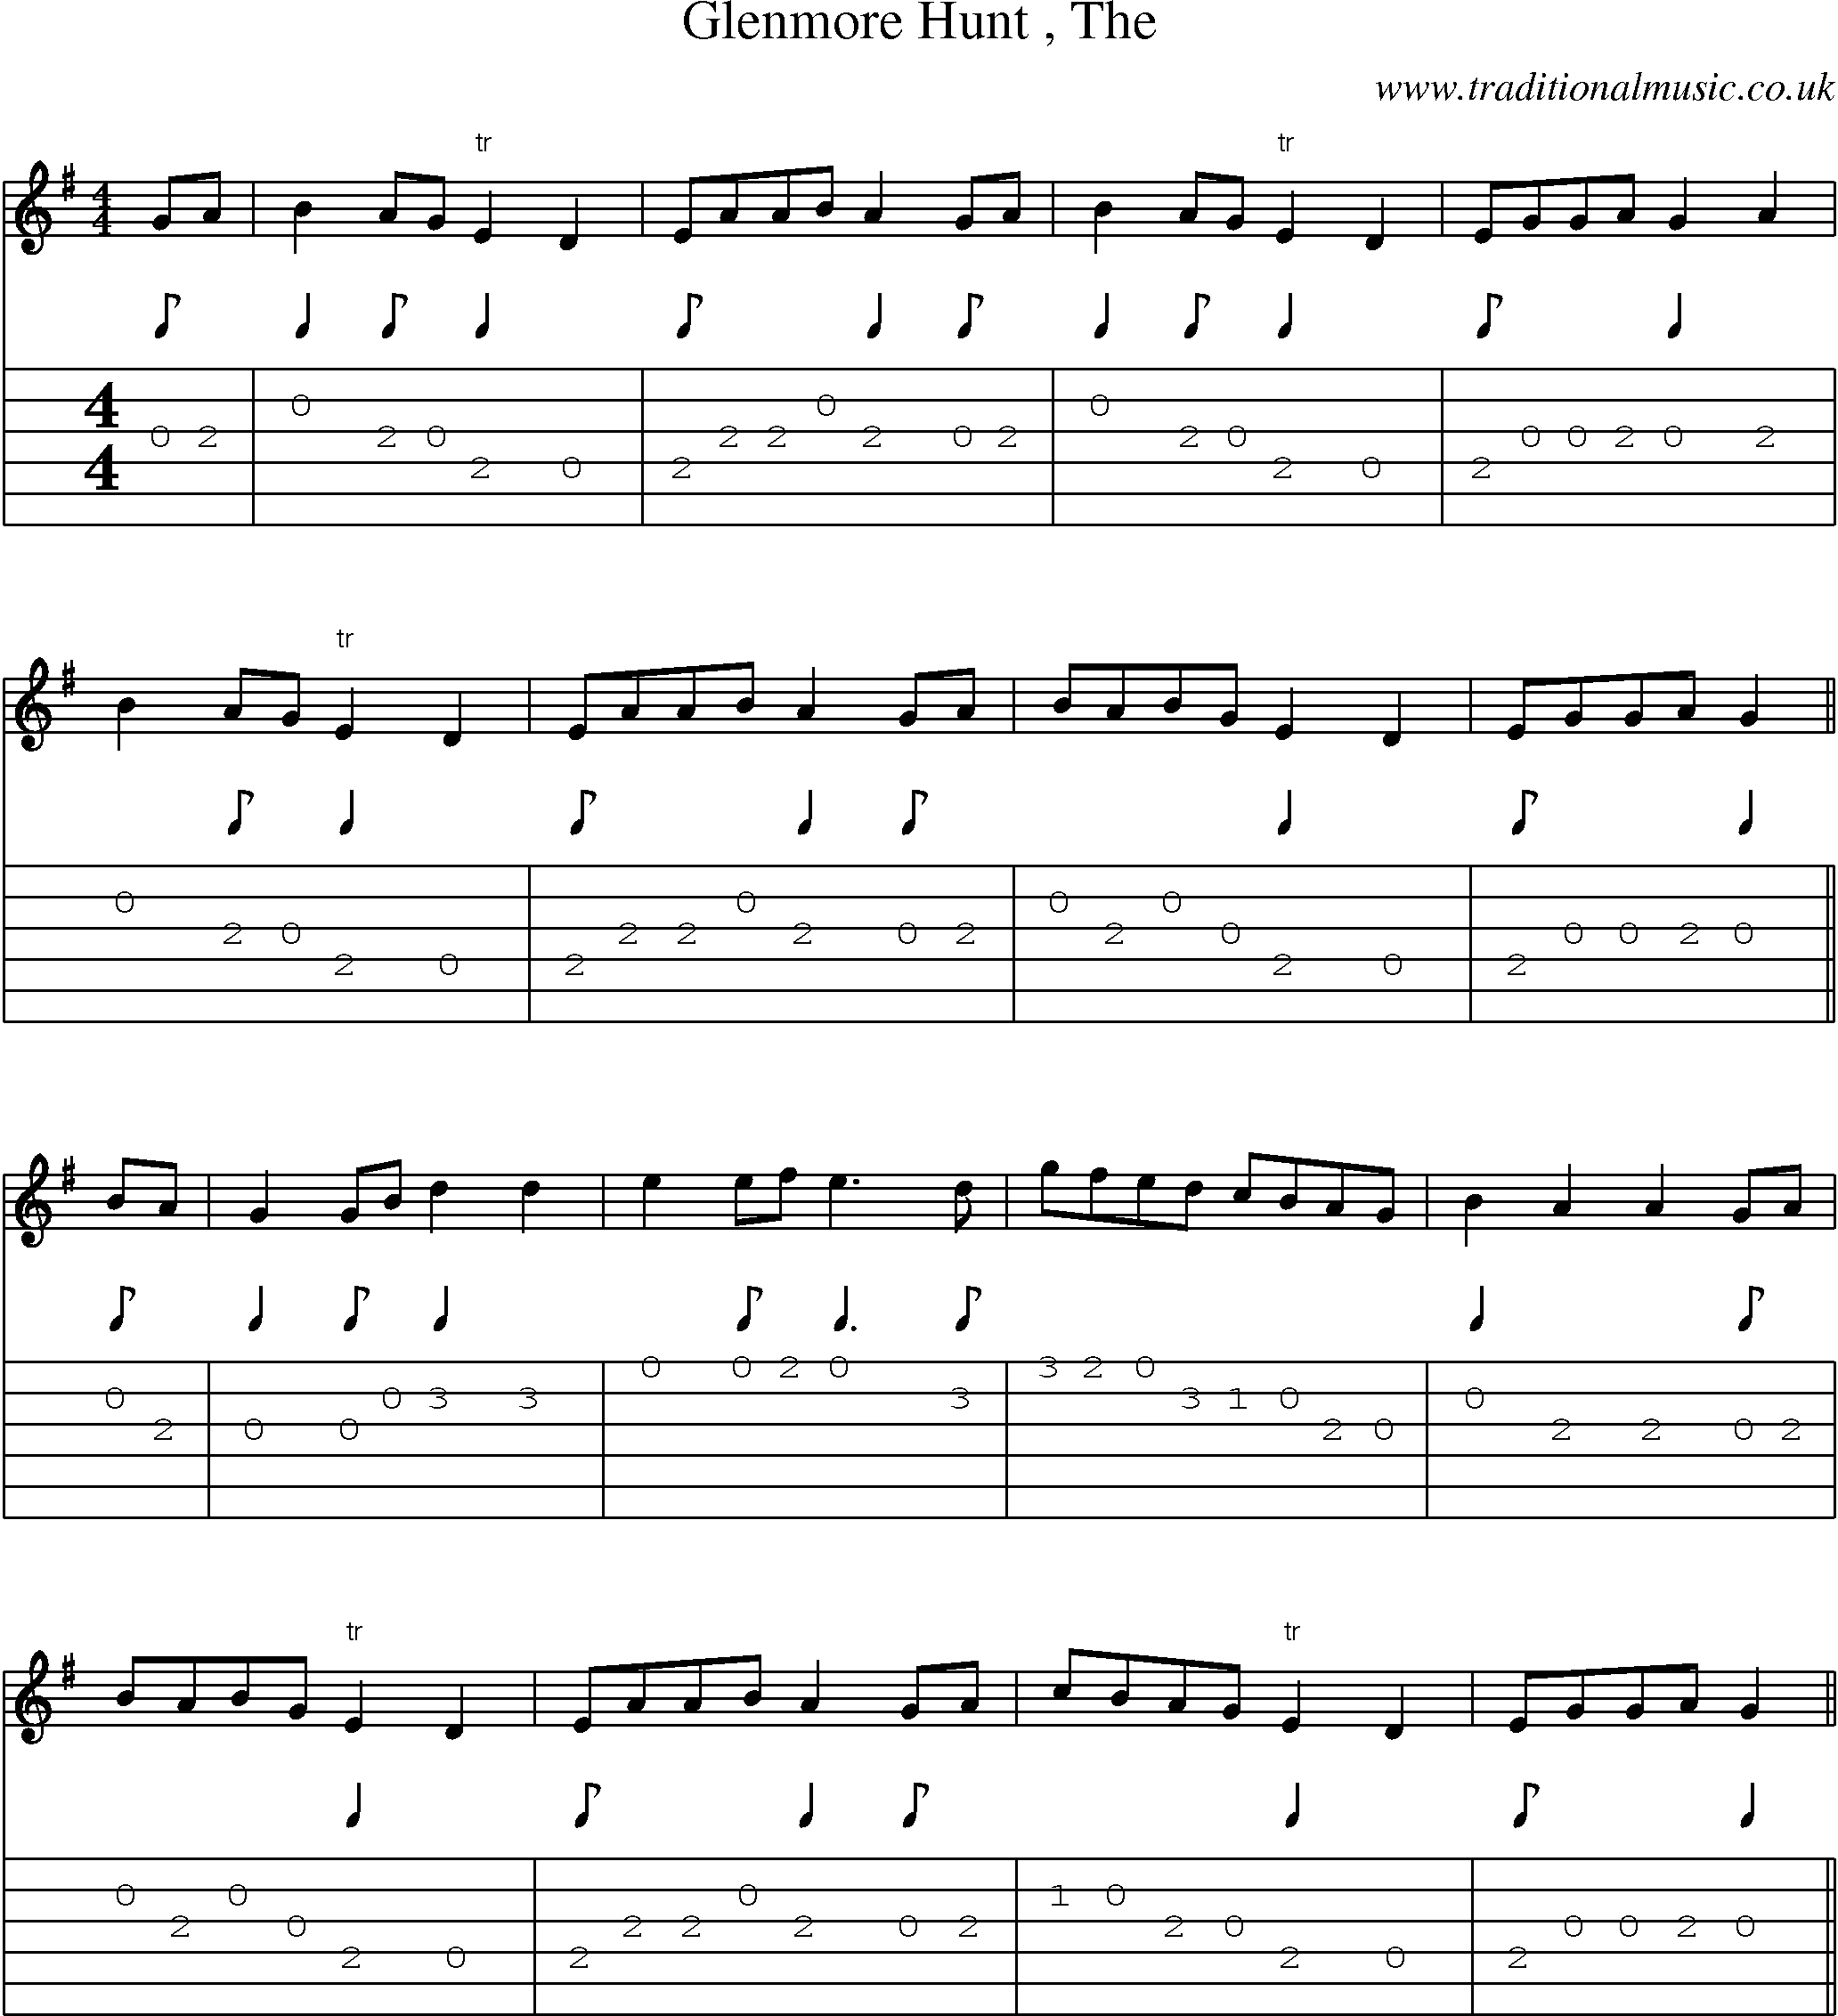 Music Score and Guitar Tabs for Glenmore Hunt